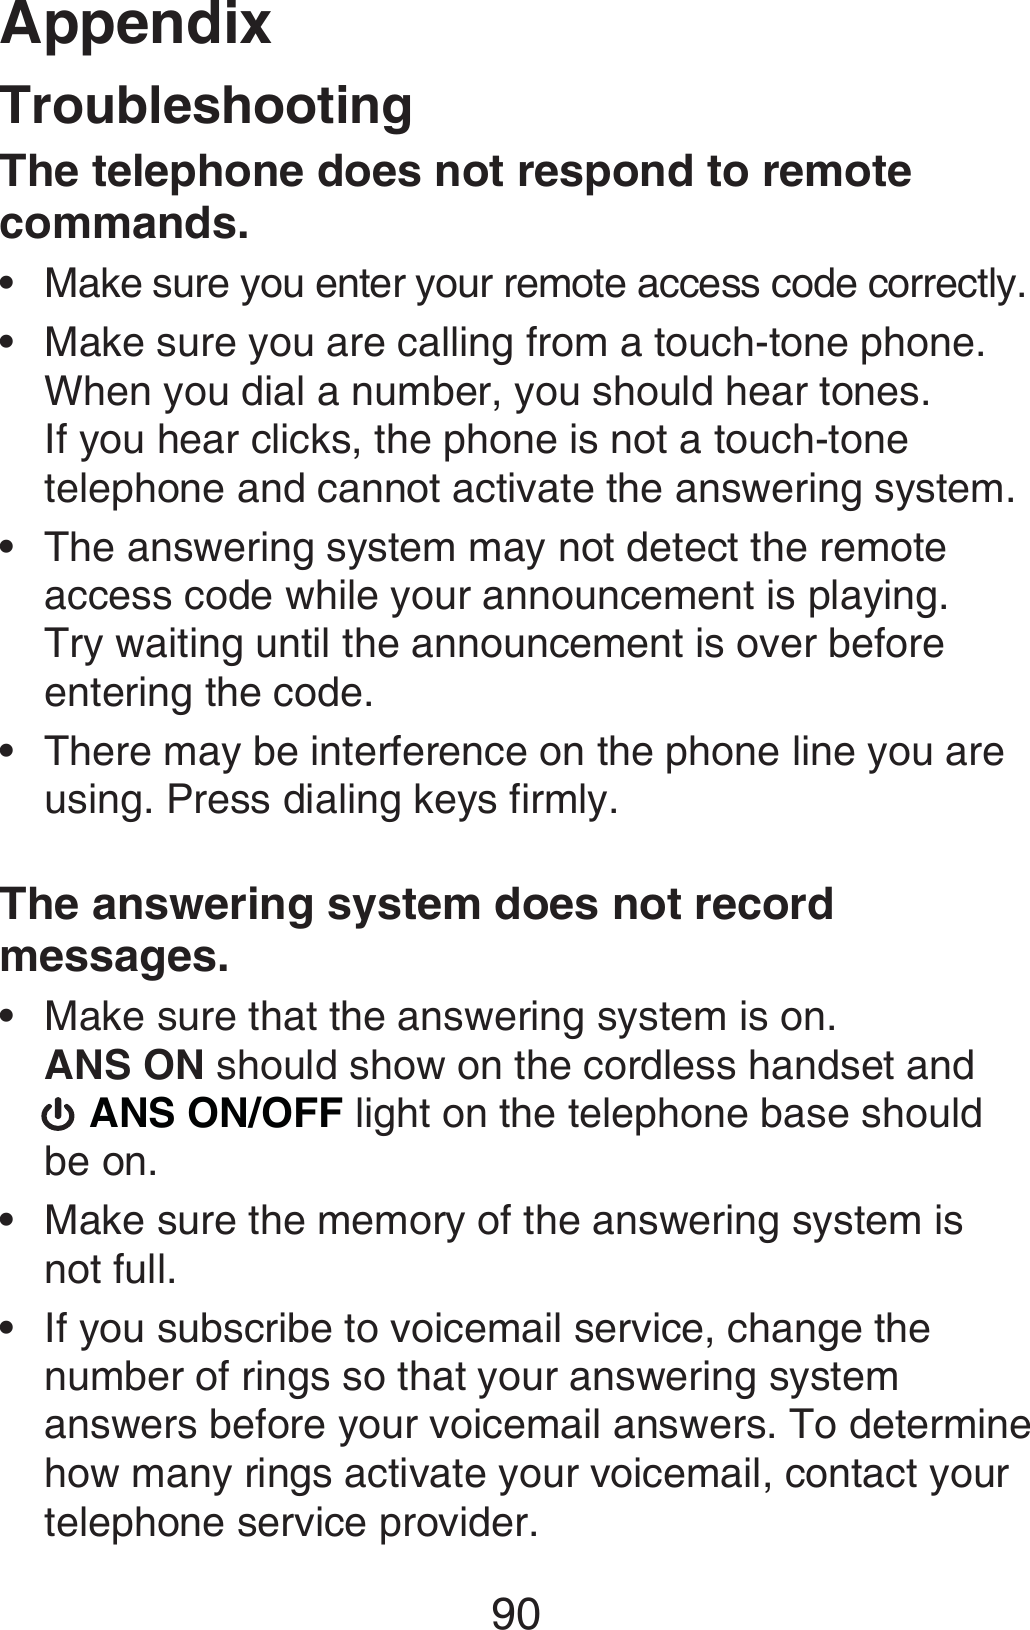 Appendix90TroubleshootingThe telephone does not respond to remote commands.Make sure you enter your remote access code correctly.Make sure you are calling from a touch-tone phone. When you dial a number, you should hear tones. If you hear clicks, the phone is not a touch-tone telephone and cannot activate the answering system.The answering system may not detect the remote access code while your announcement is playing. Try waiting until the announcement is over before entering the code.There may be interference on the phone line you are using. Press dialing keys firmly.The answering system does not record messages.Make sure that the answering system is on.  ANS ON should show on the cordless handset and   ANS ON/OFF light on the telephone base should be on.Make sure the memory of the answering system is  not full.If you subscribe to voicemail service, change the number of rings so that your answering system answers before your voicemail answers. To determine how many rings activate your voicemail, contact your telephone service provider.•••••••